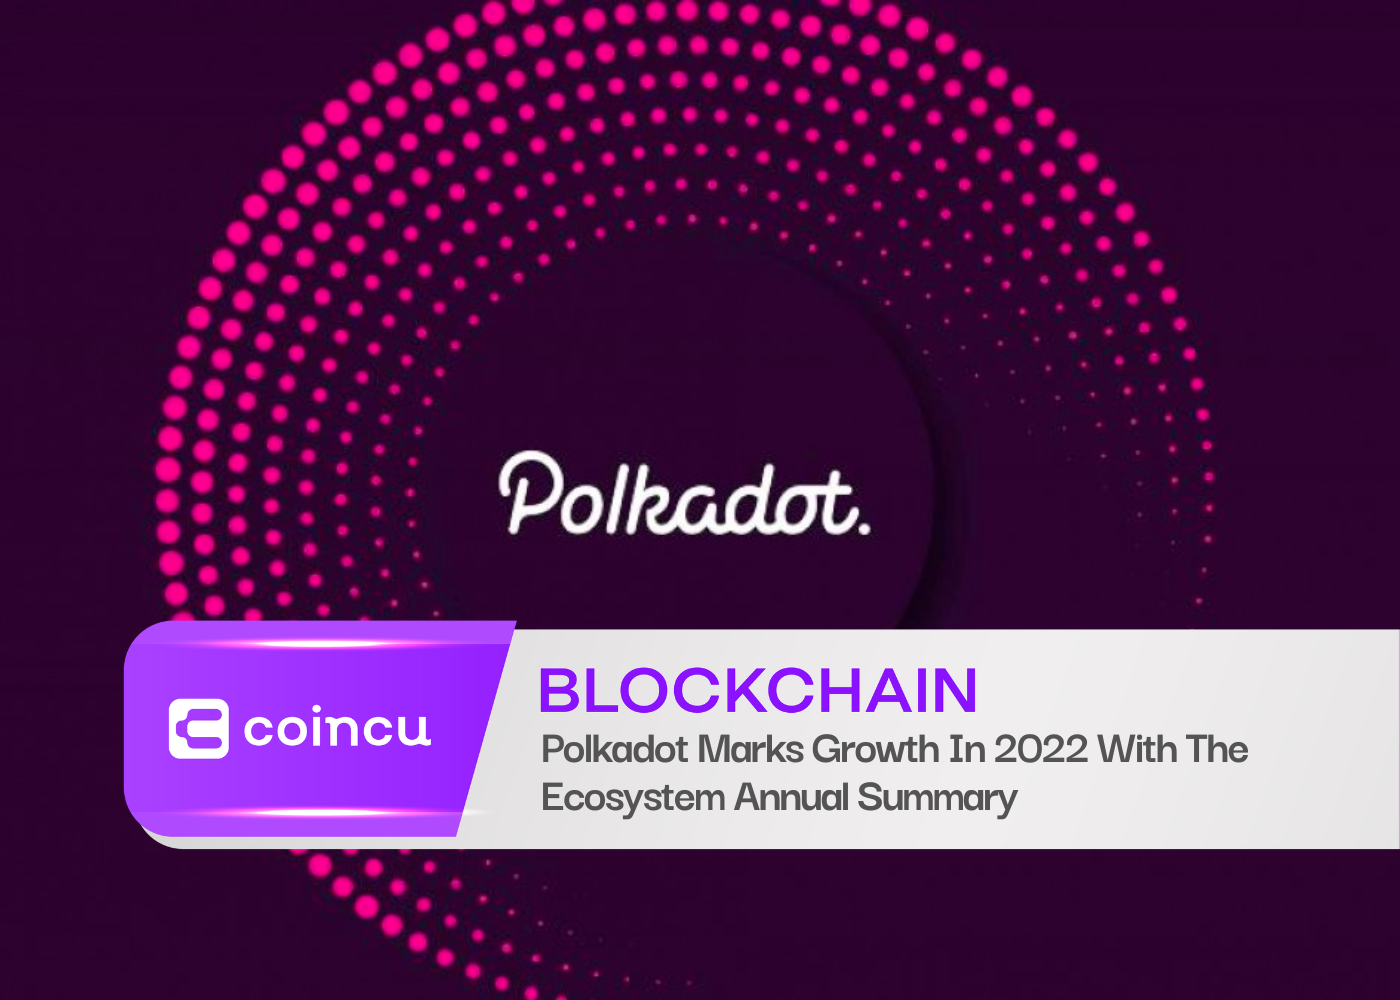 Polkadot Marks Growth In 2022 With The Ecosystem Annual Summary